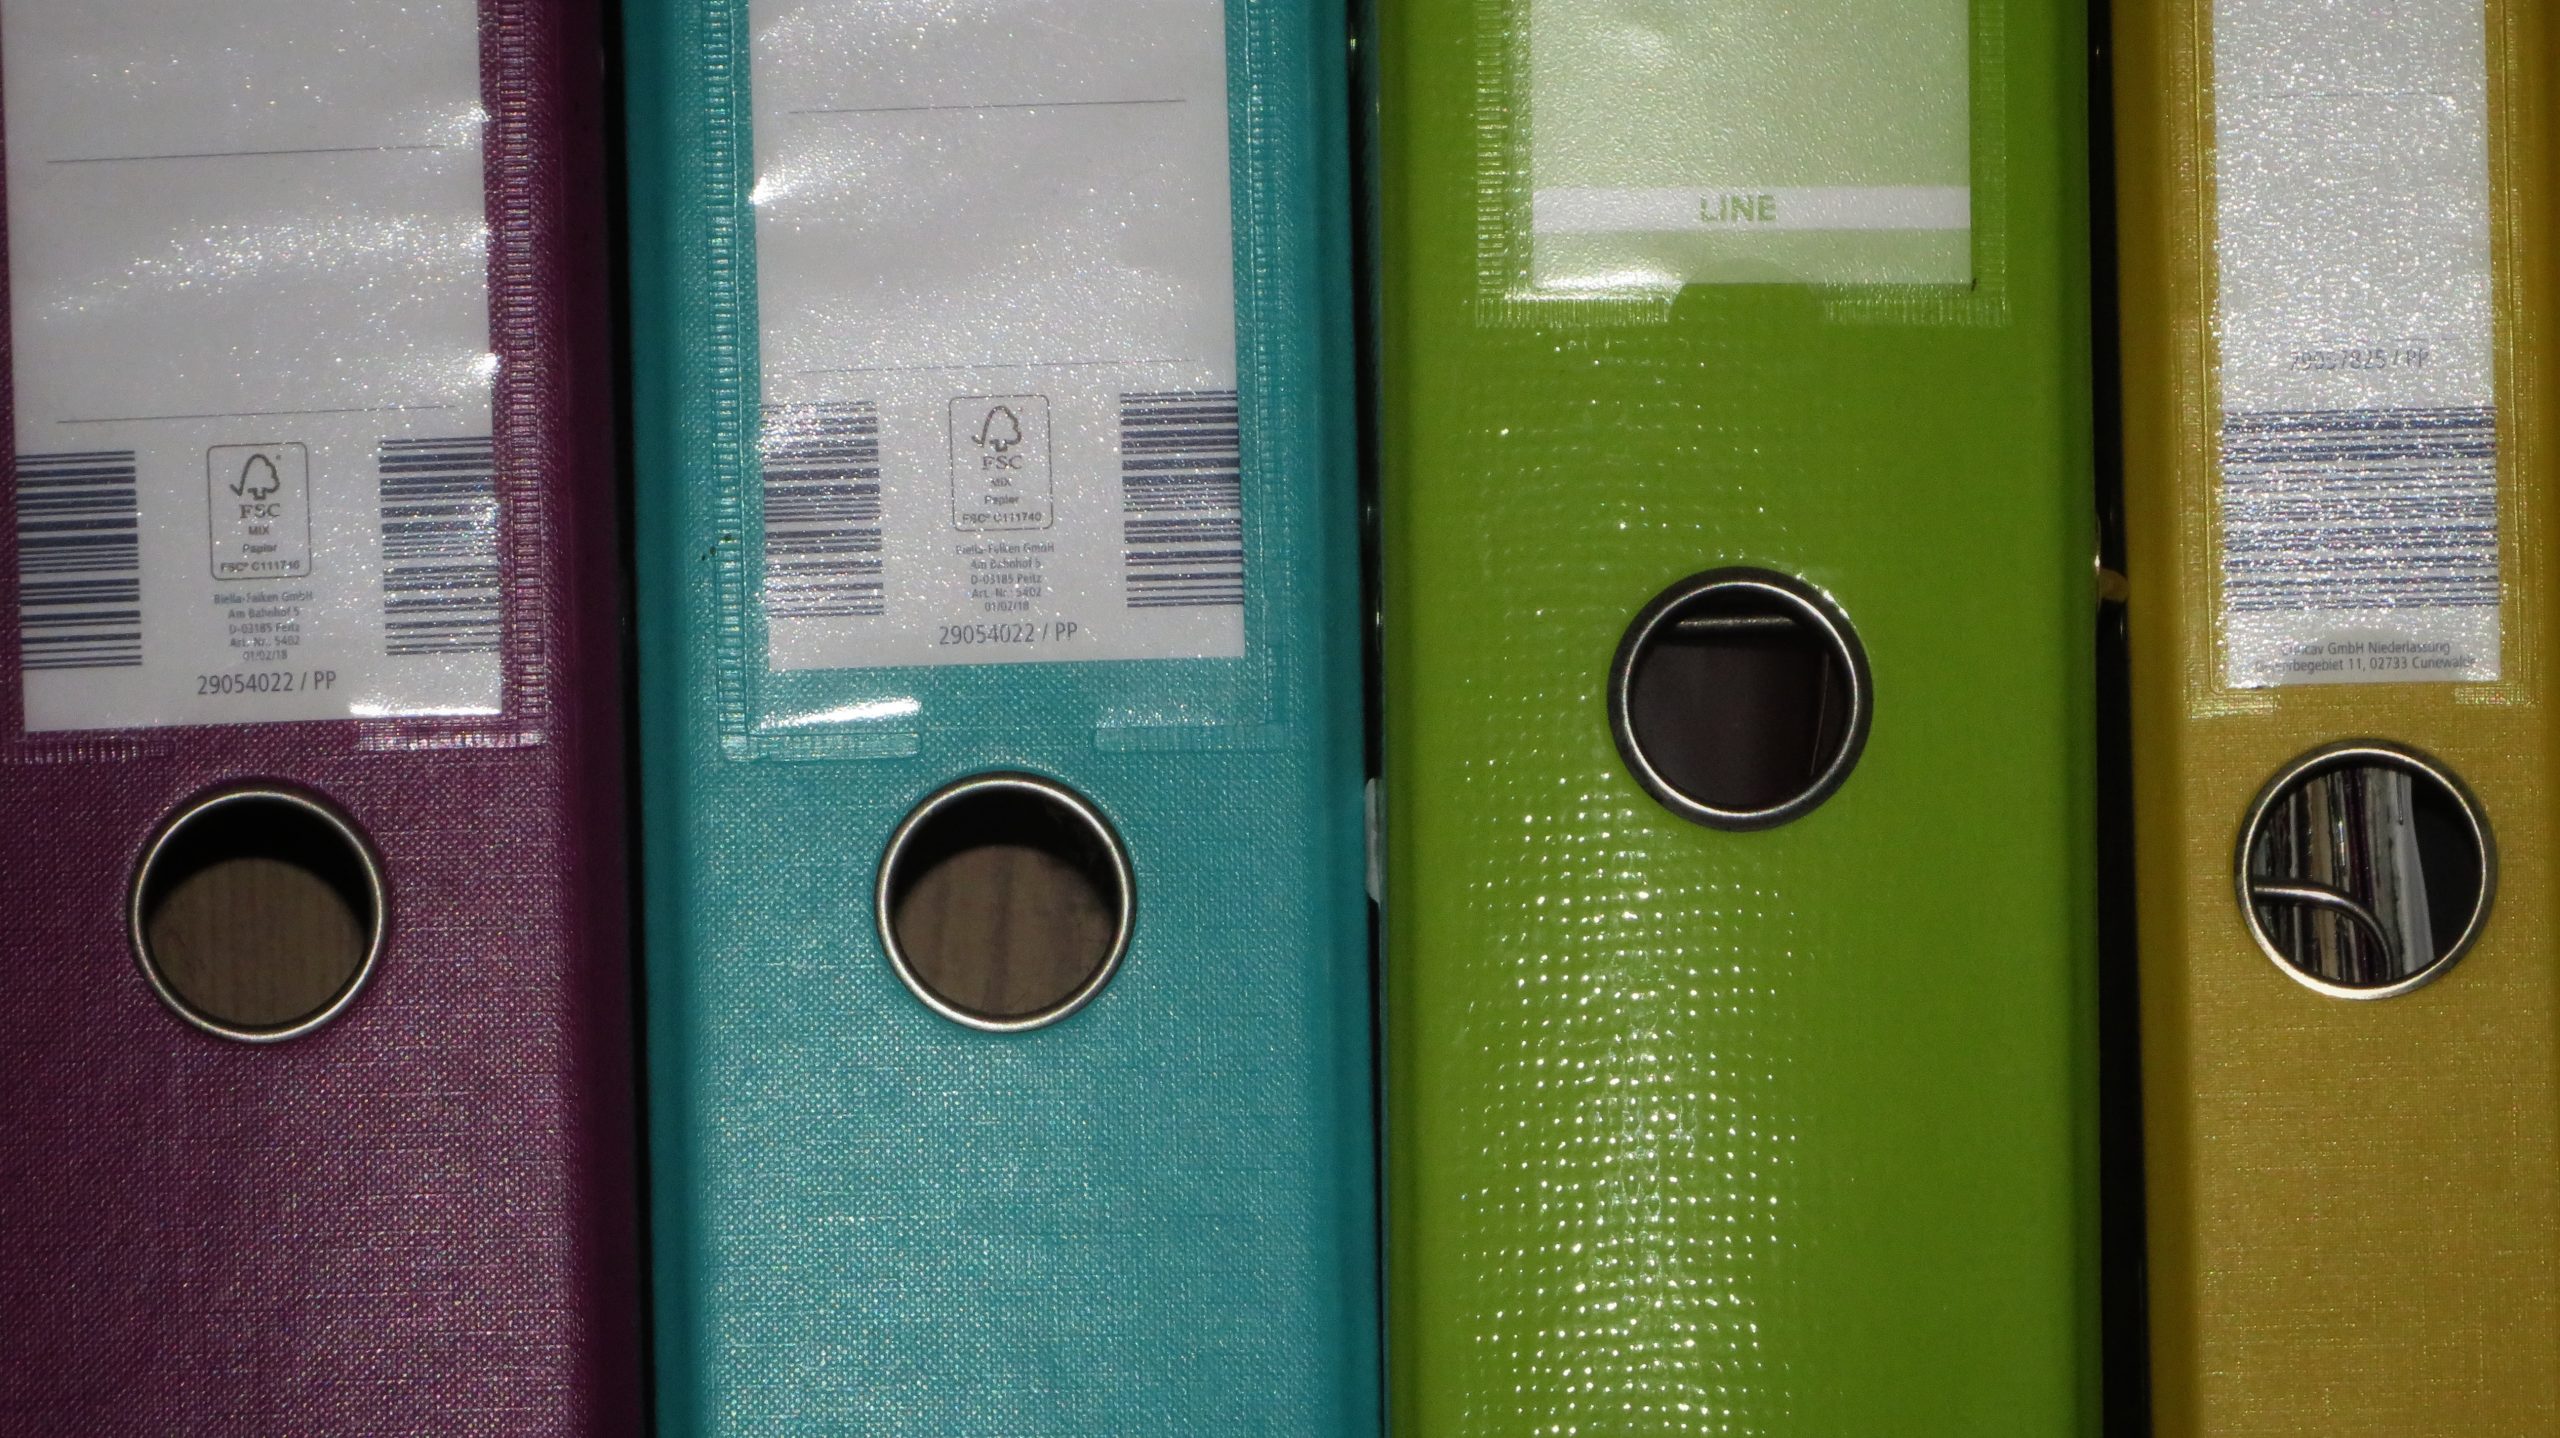 The image shows a close-up of four upright lever arch files in different colors—pink, teal, lime green, and yellow. Each binder has a metal ring at the bottom of the spine for easy handling and a label slot at the top. The textured surfaces of the binders reflect light, and barcode labels are visible on the front covers.